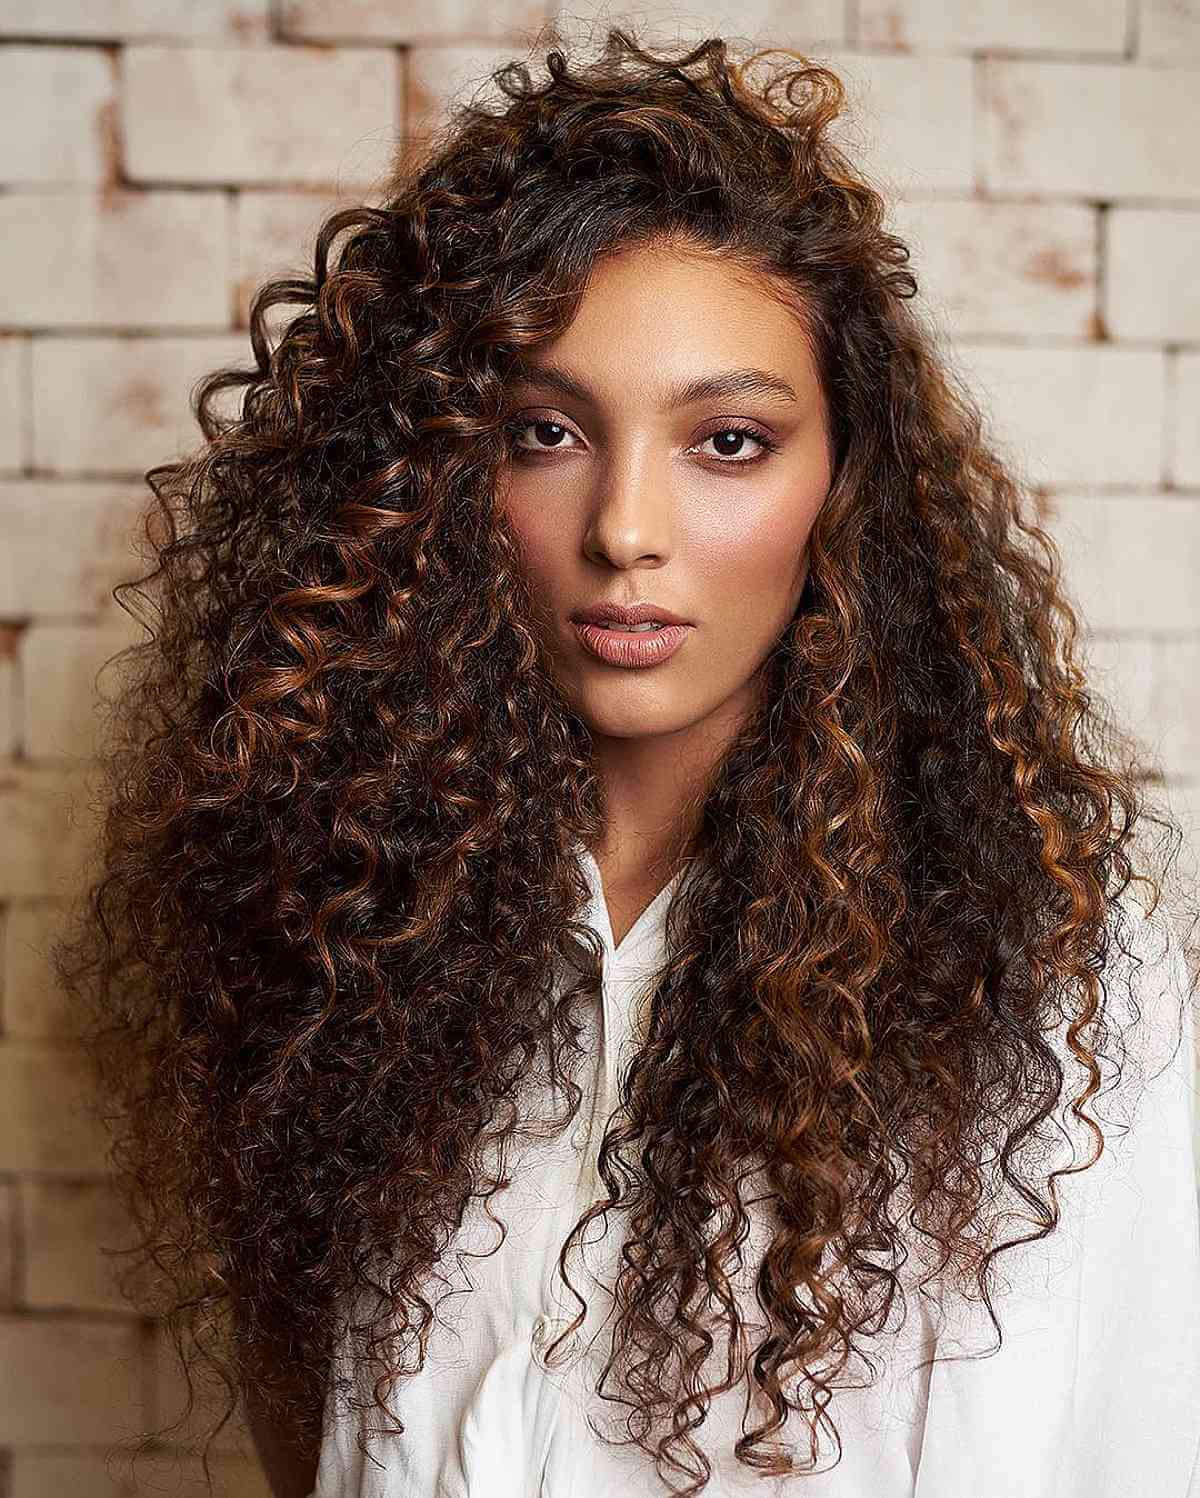 Long 3b Curly Hair with a Side Part